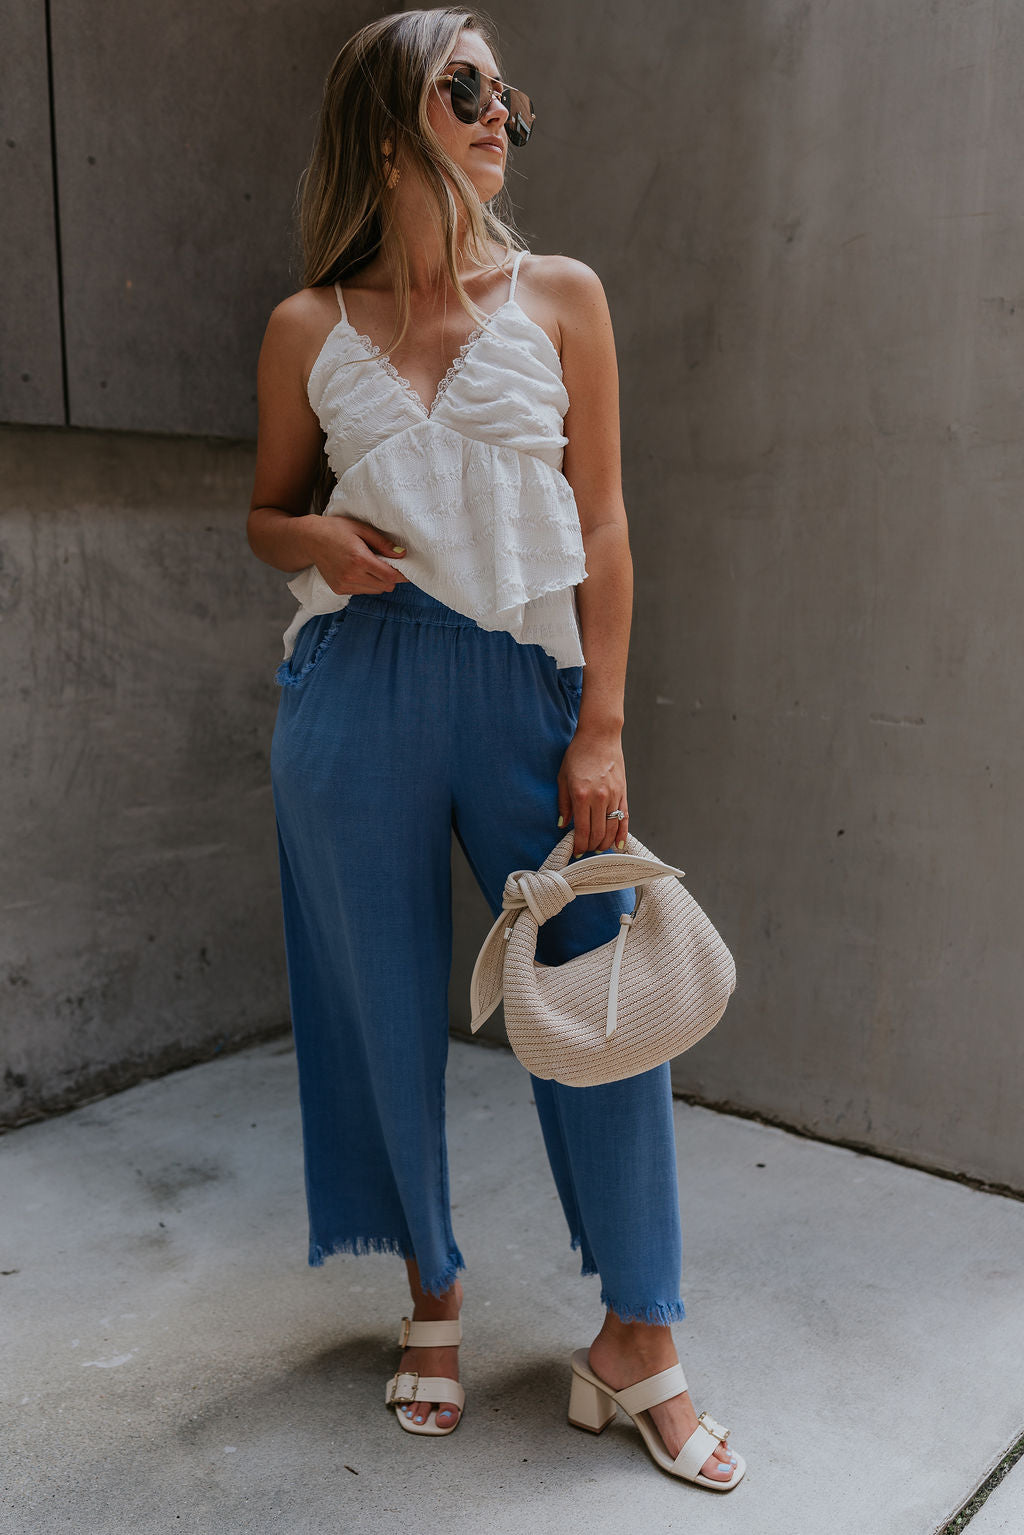 Full body view of female model wearing the Leona Linen Fray Cropped Pants which features Lightweight Fabric, Wide Cropped Leg, Fray Hem Details, Two Front Pockets and Elastic Waistband. the pants are available in blue, green and white.